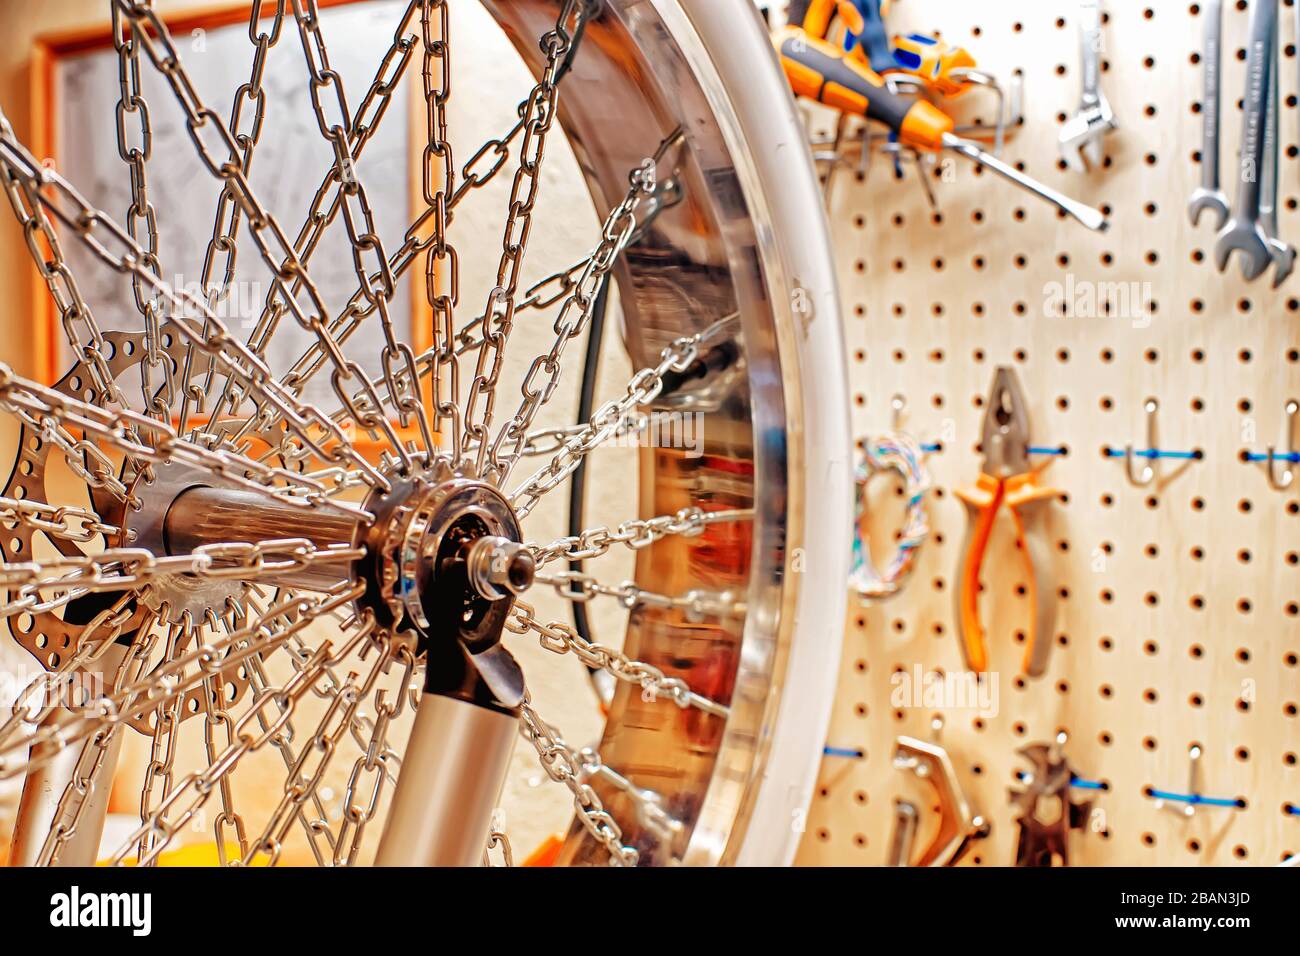 Custom wheel and tools in the bicycle workshop. Selective focus Stock Photo